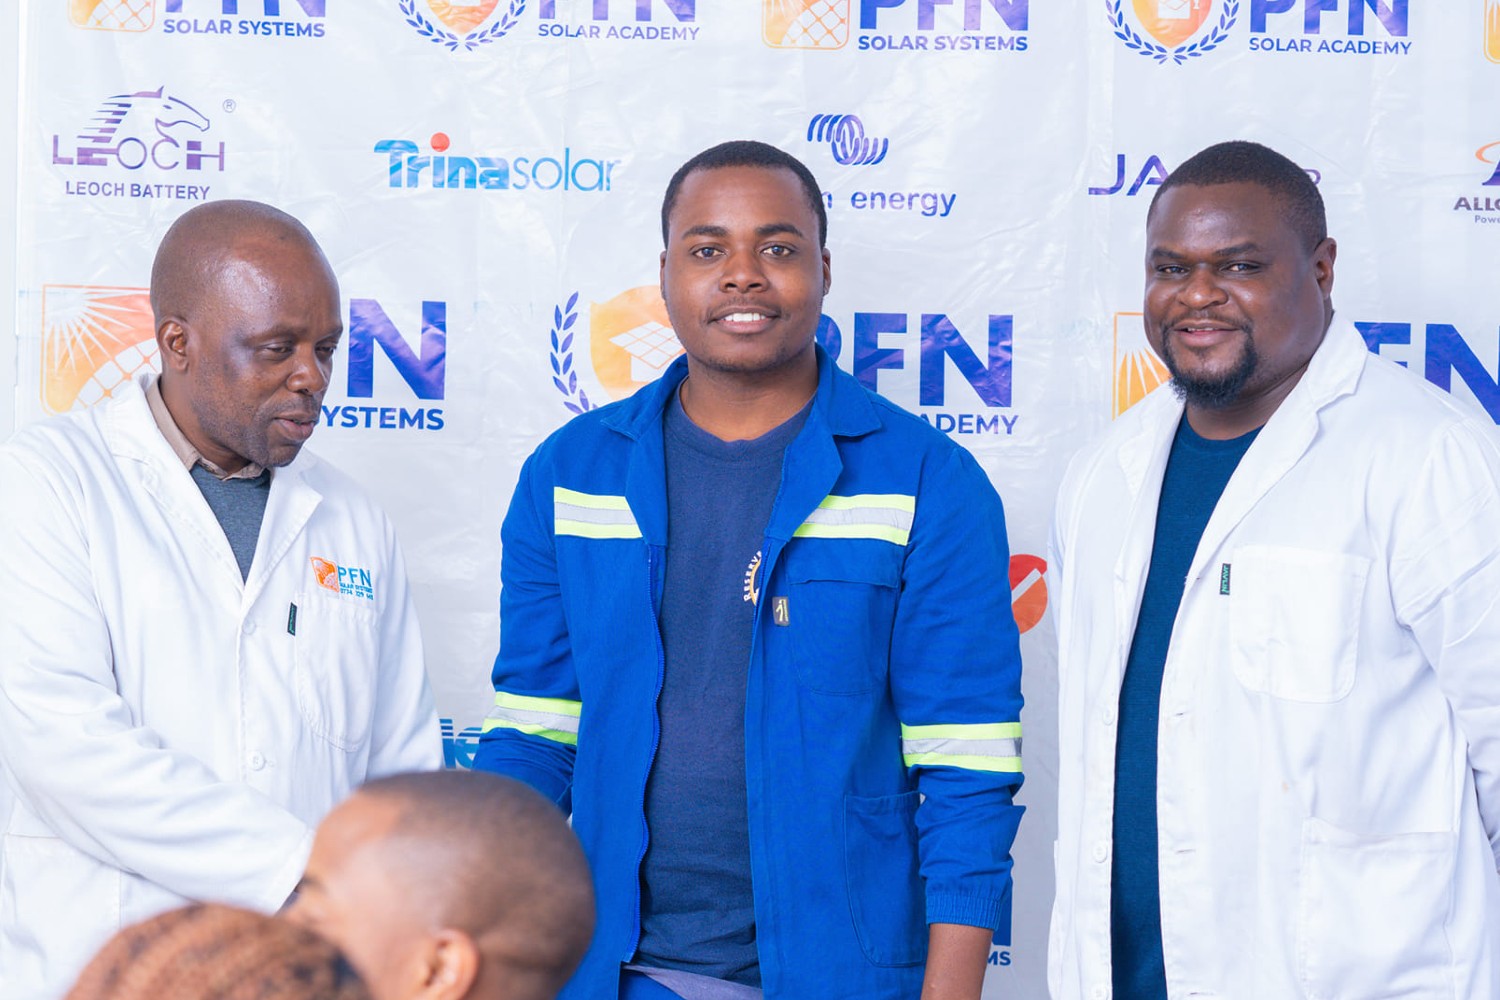 PFN Solar Systems: Leading the Way in Electrical and Solar Power Solutions in Zimbabwe